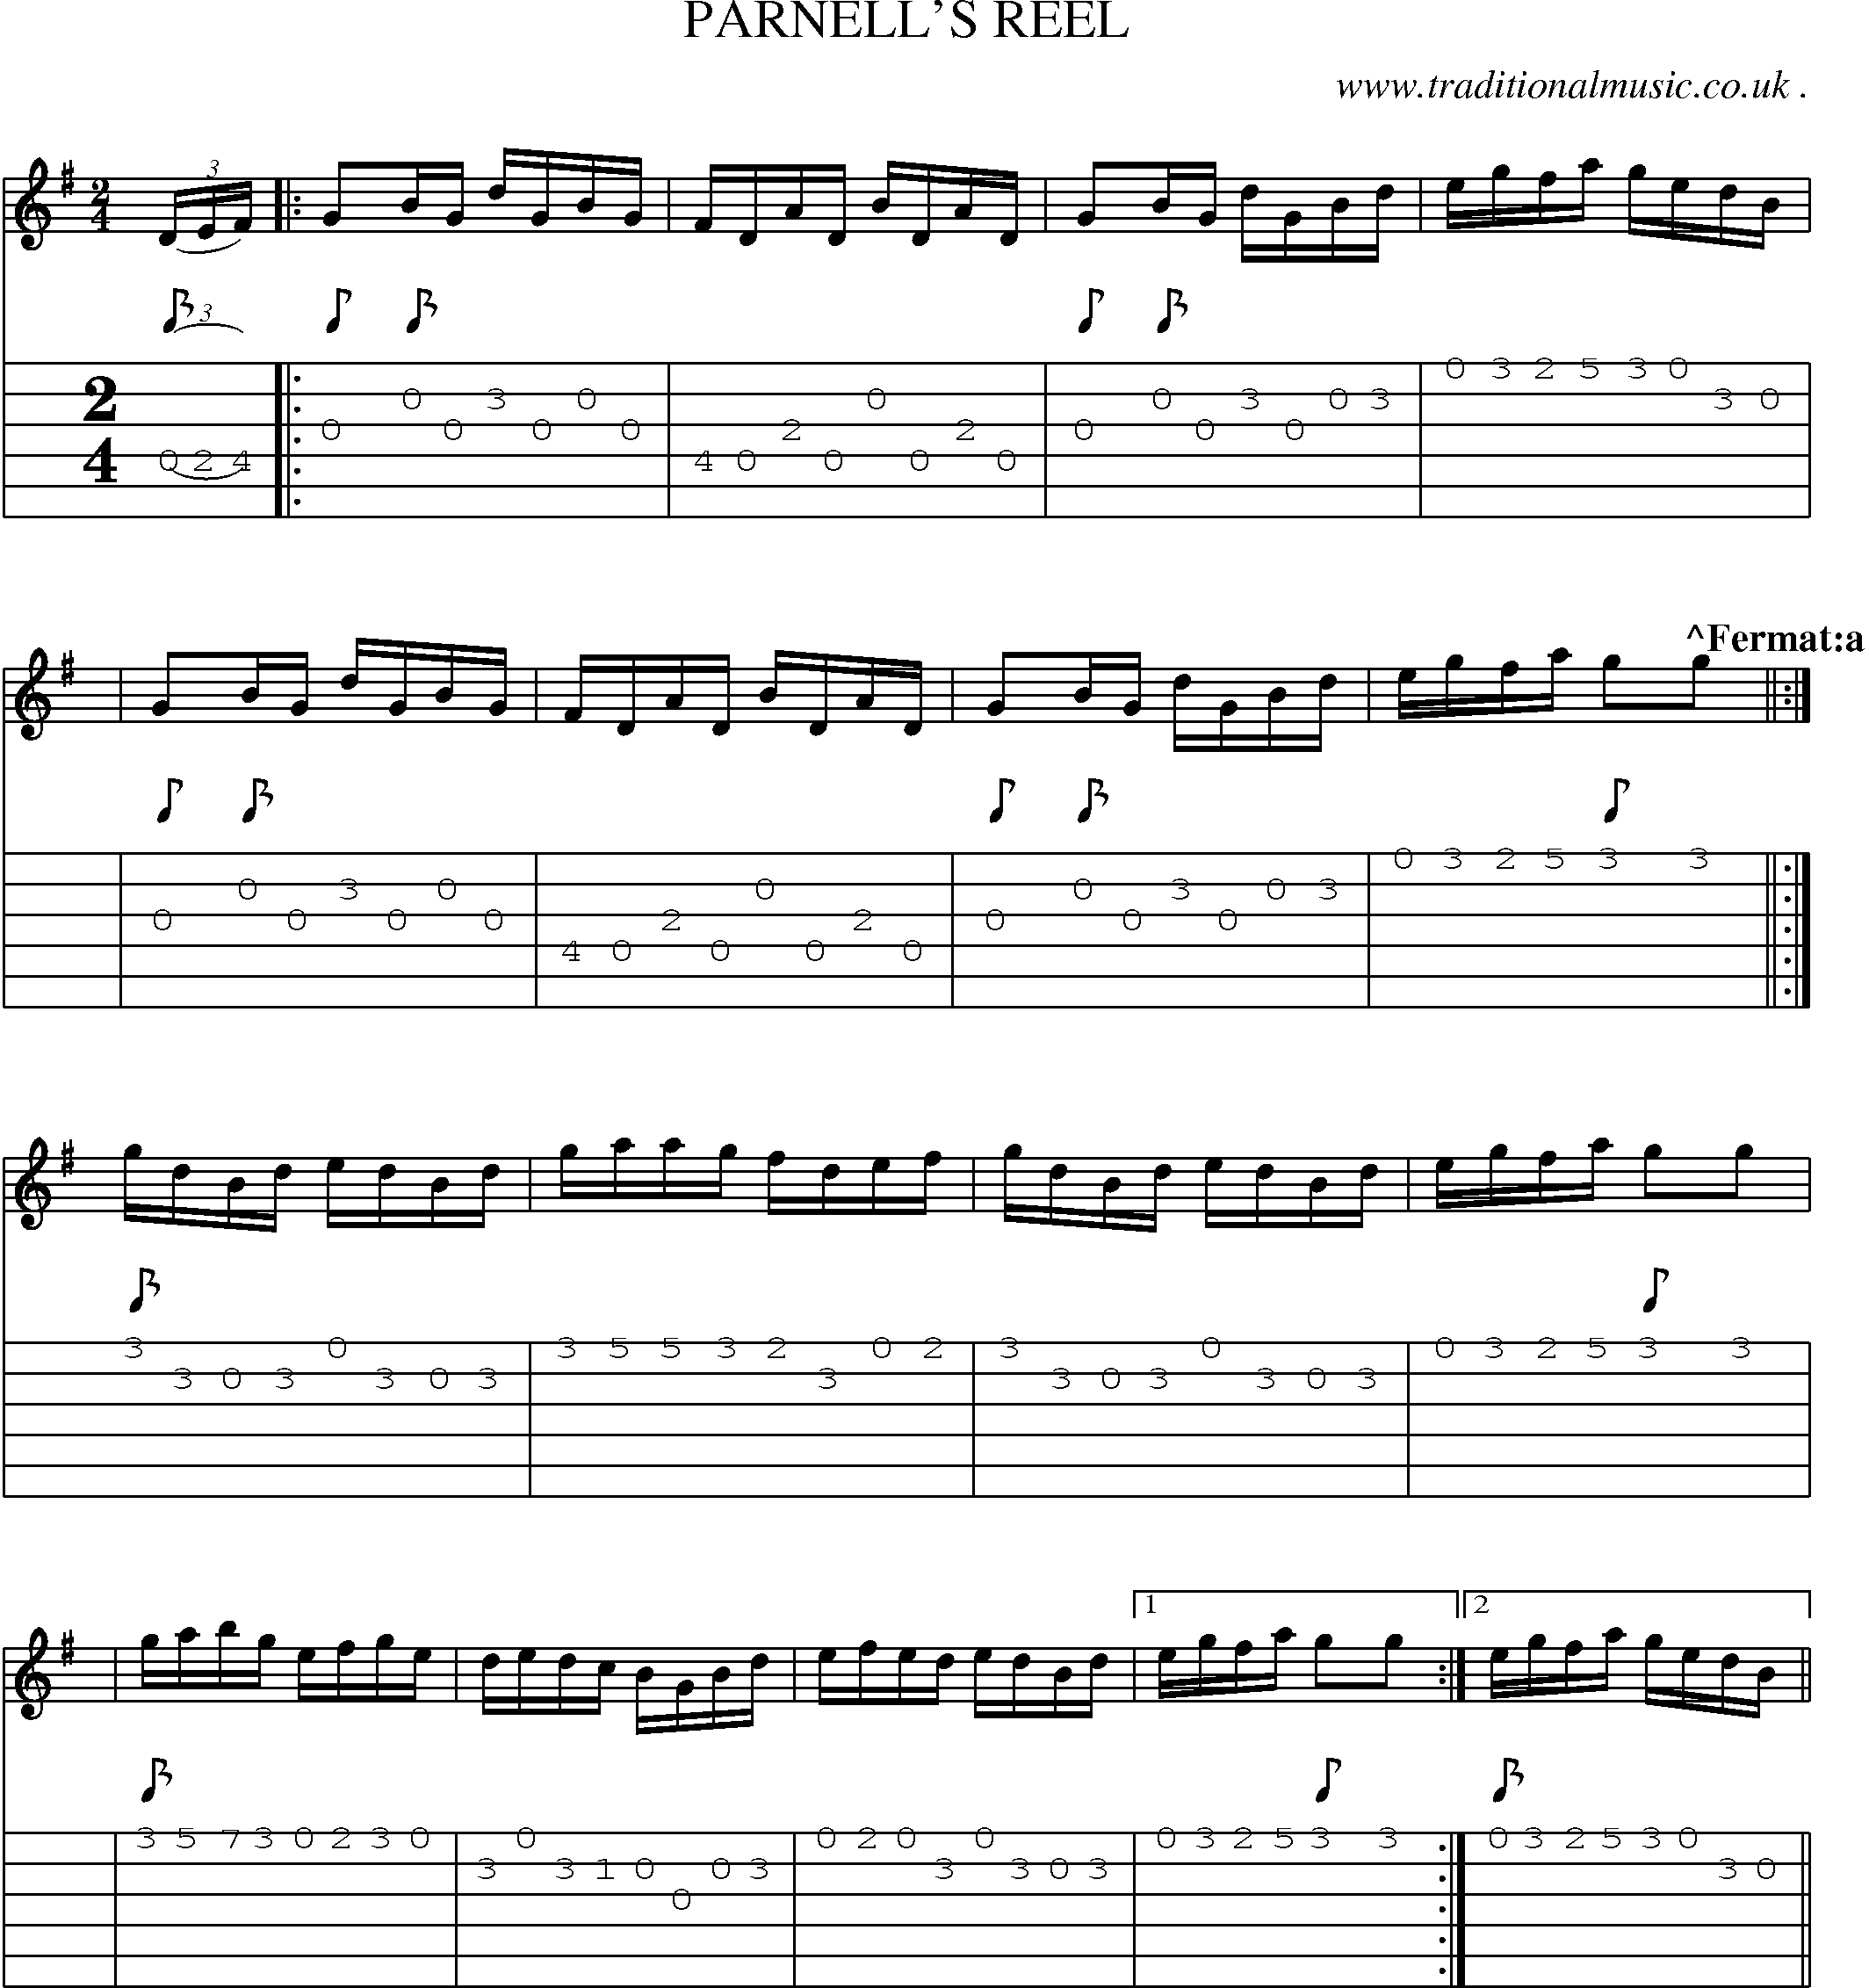 Sheet-Music and Guitar Tabs for Parnells Reel